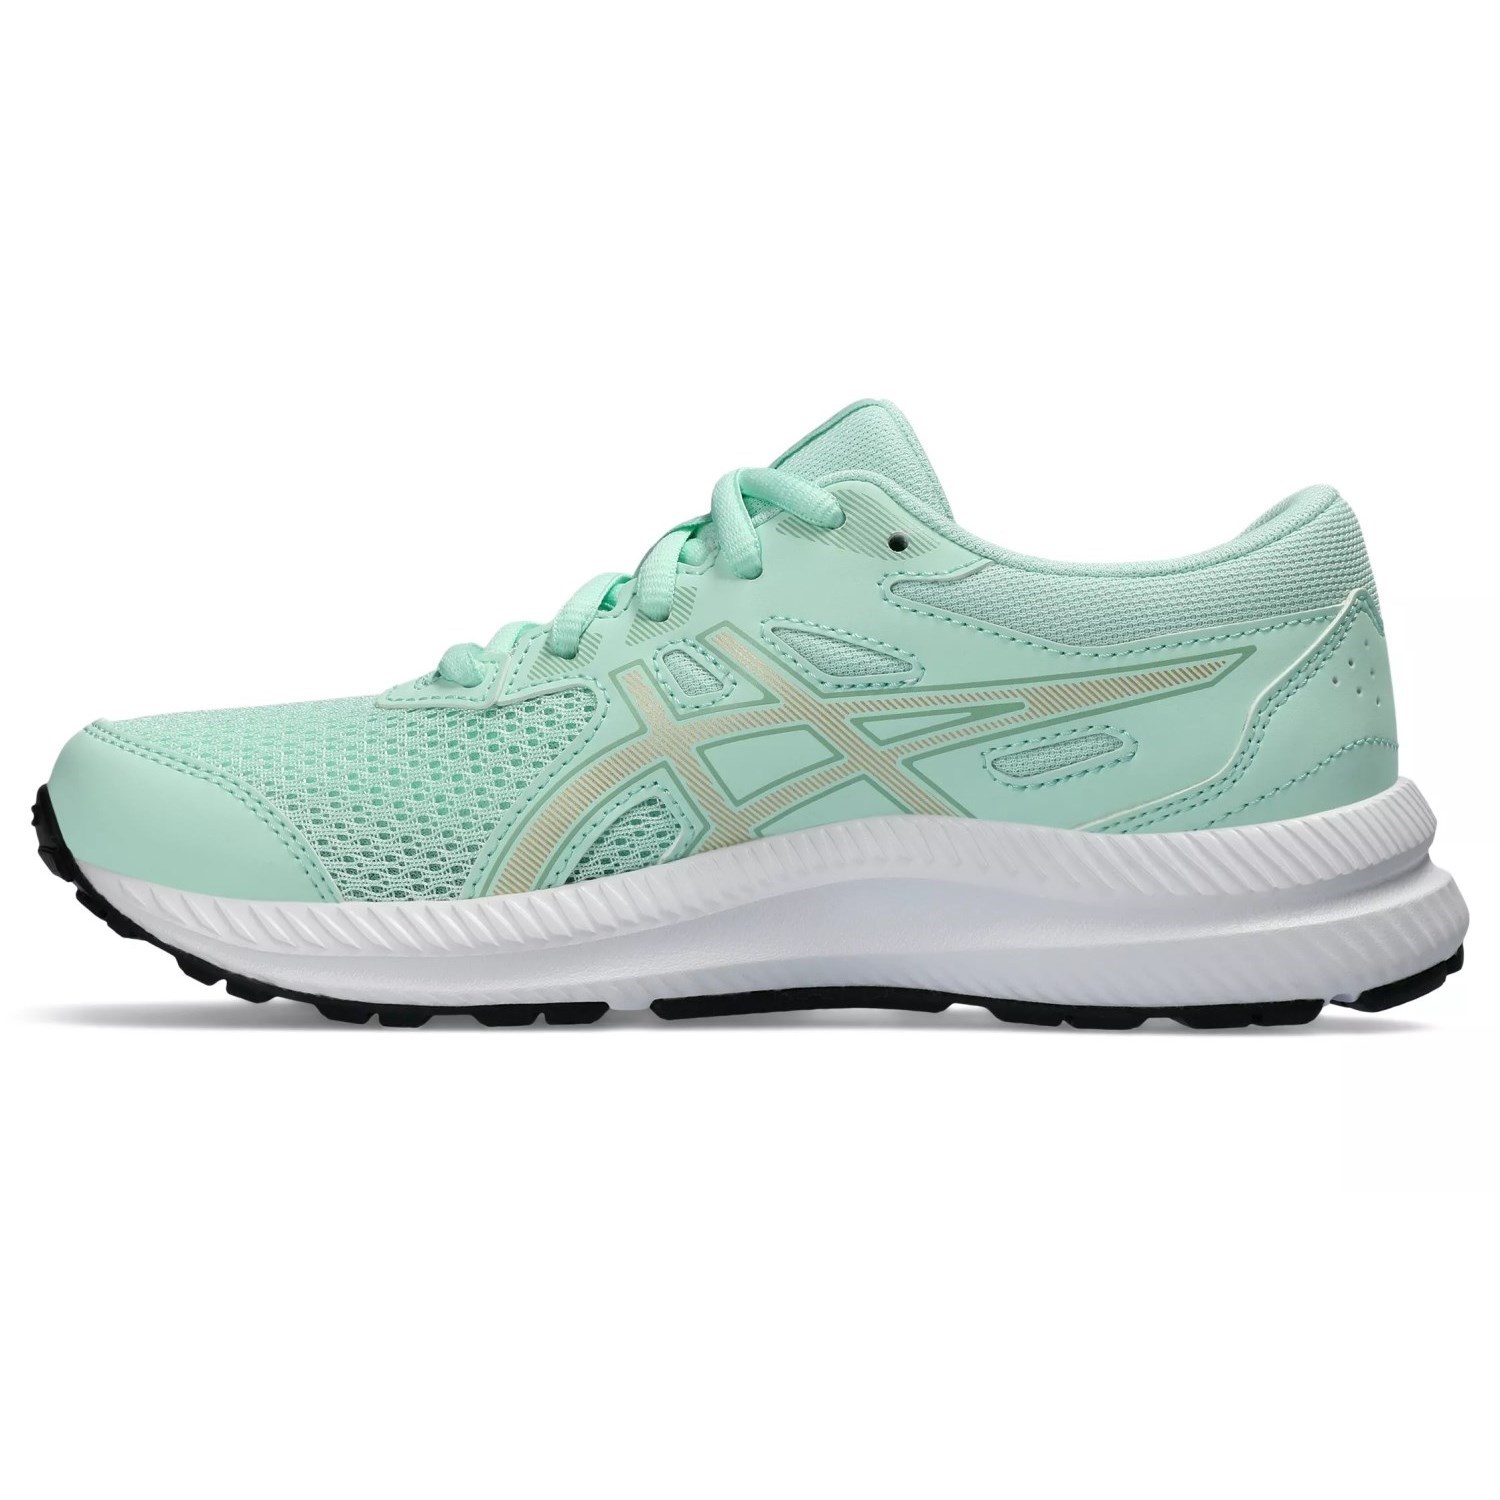 Asics Contend 8 GS - Kids Running Shoes - Mint Tint/Champagne | Sportitude